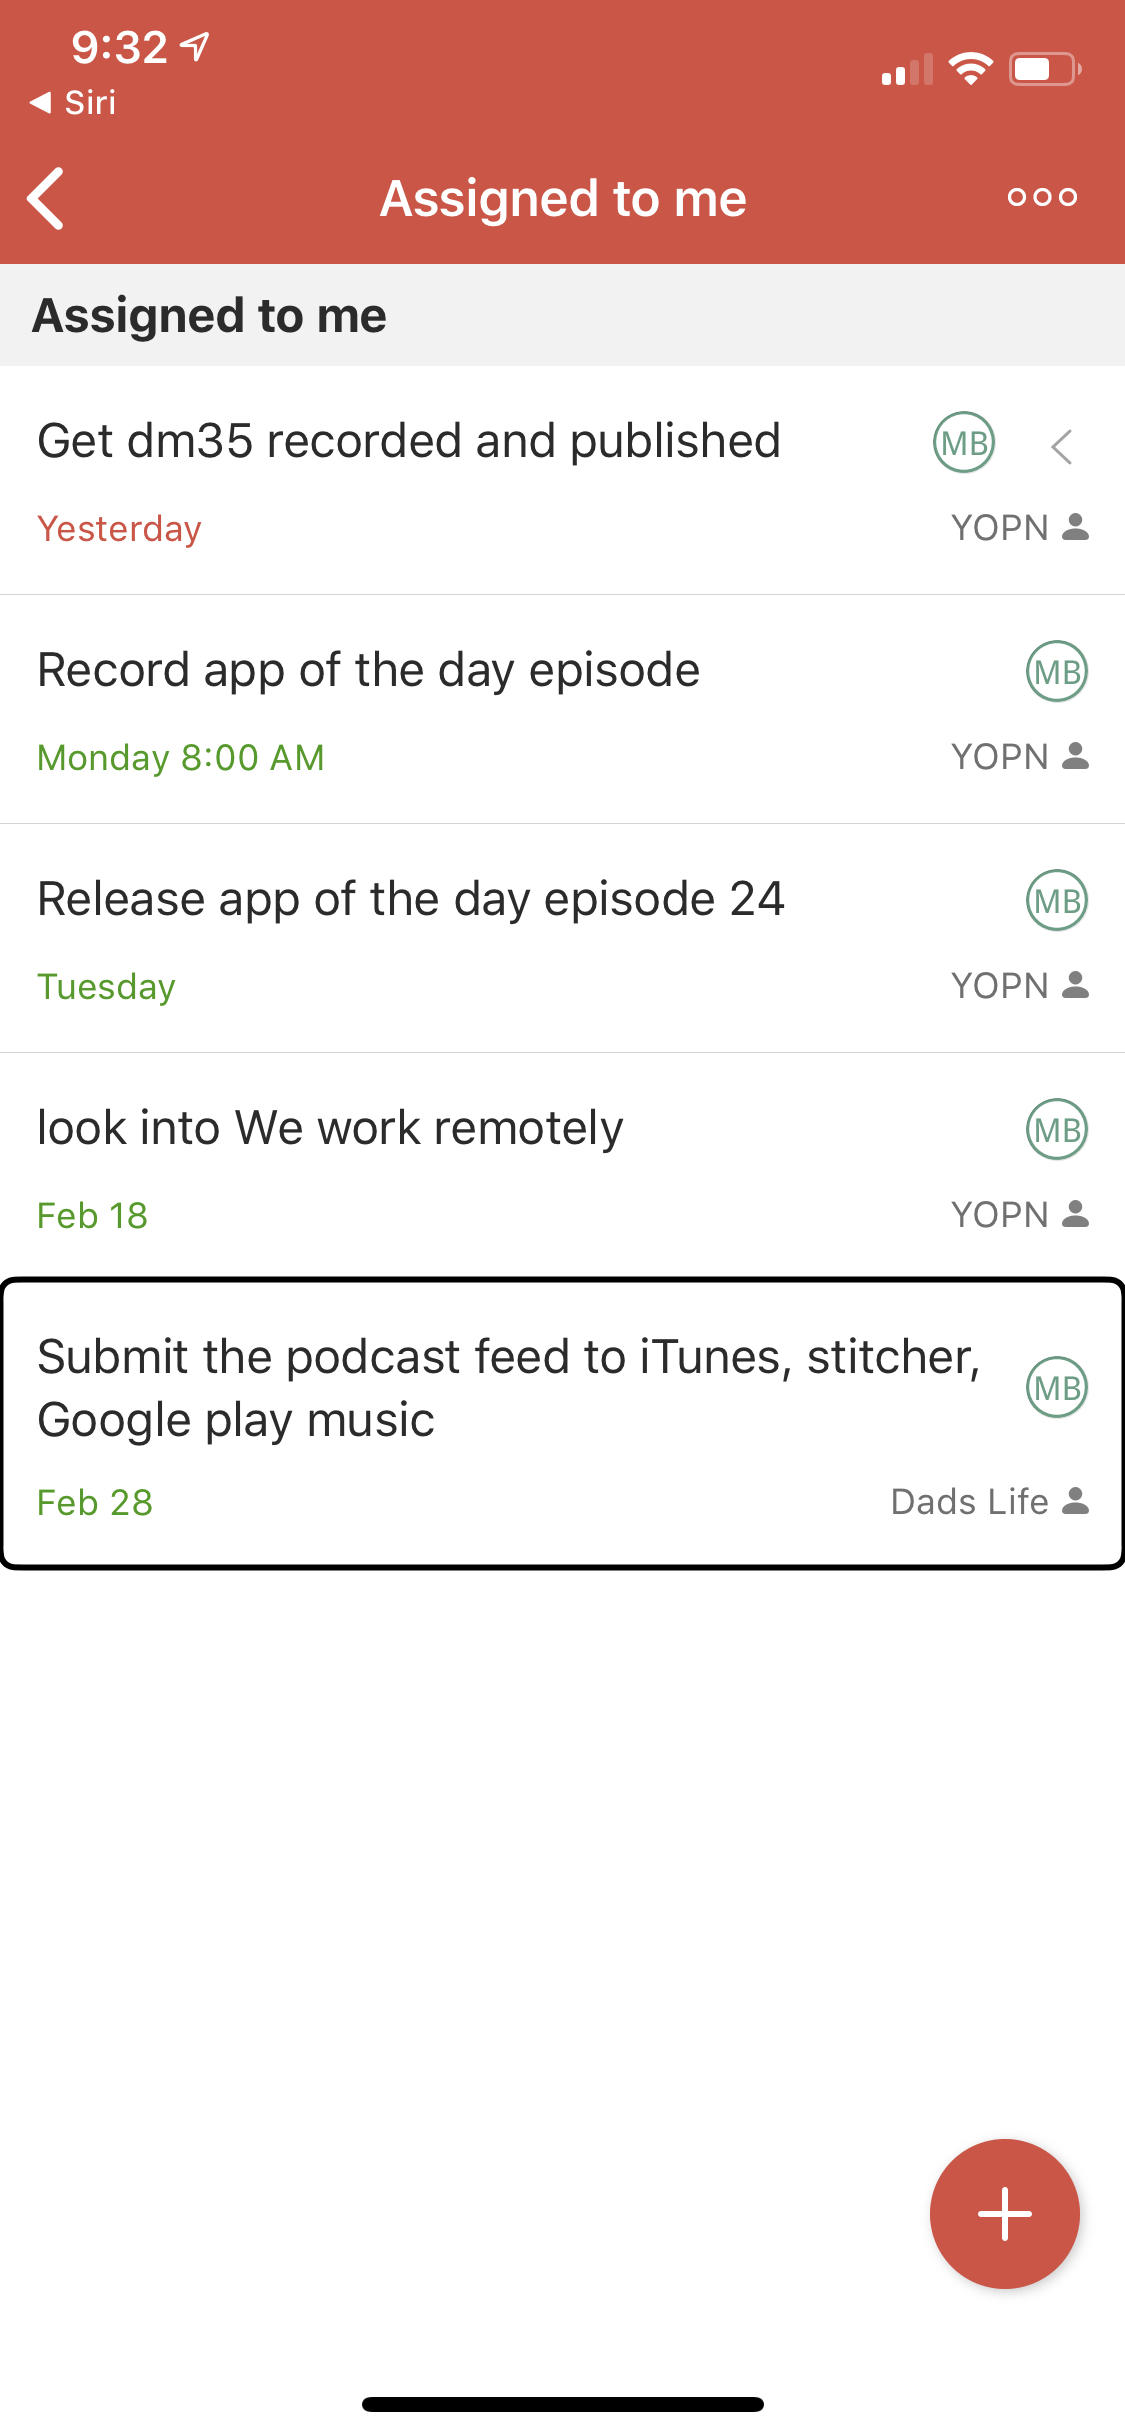 Screenshot of the Todoist app showing tasks assigned to Michael